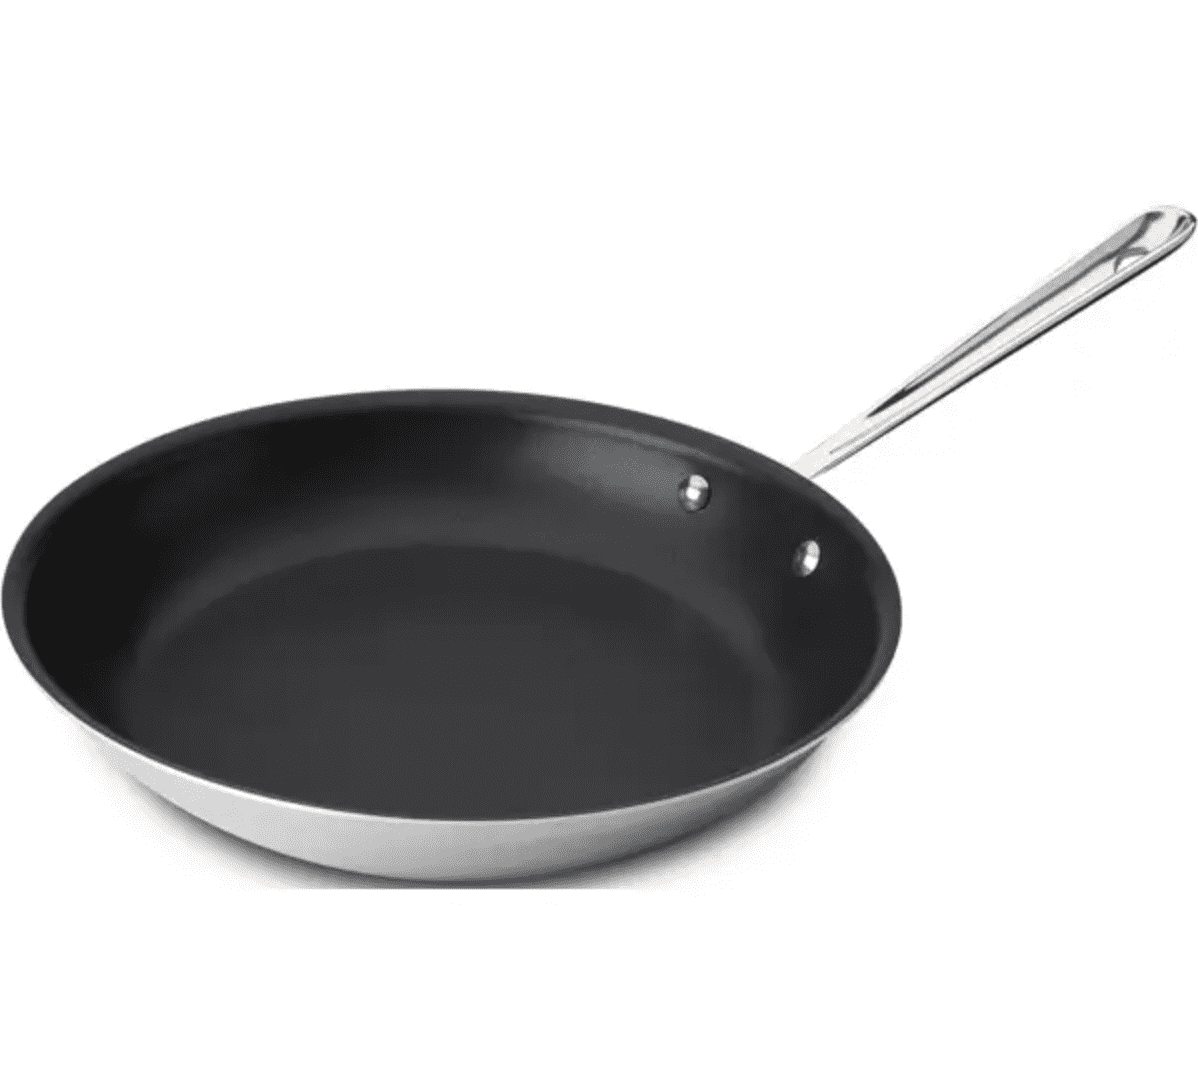 Whoa—These All-Clad Frying Pans Are Nearly 50% Off at  Right Now